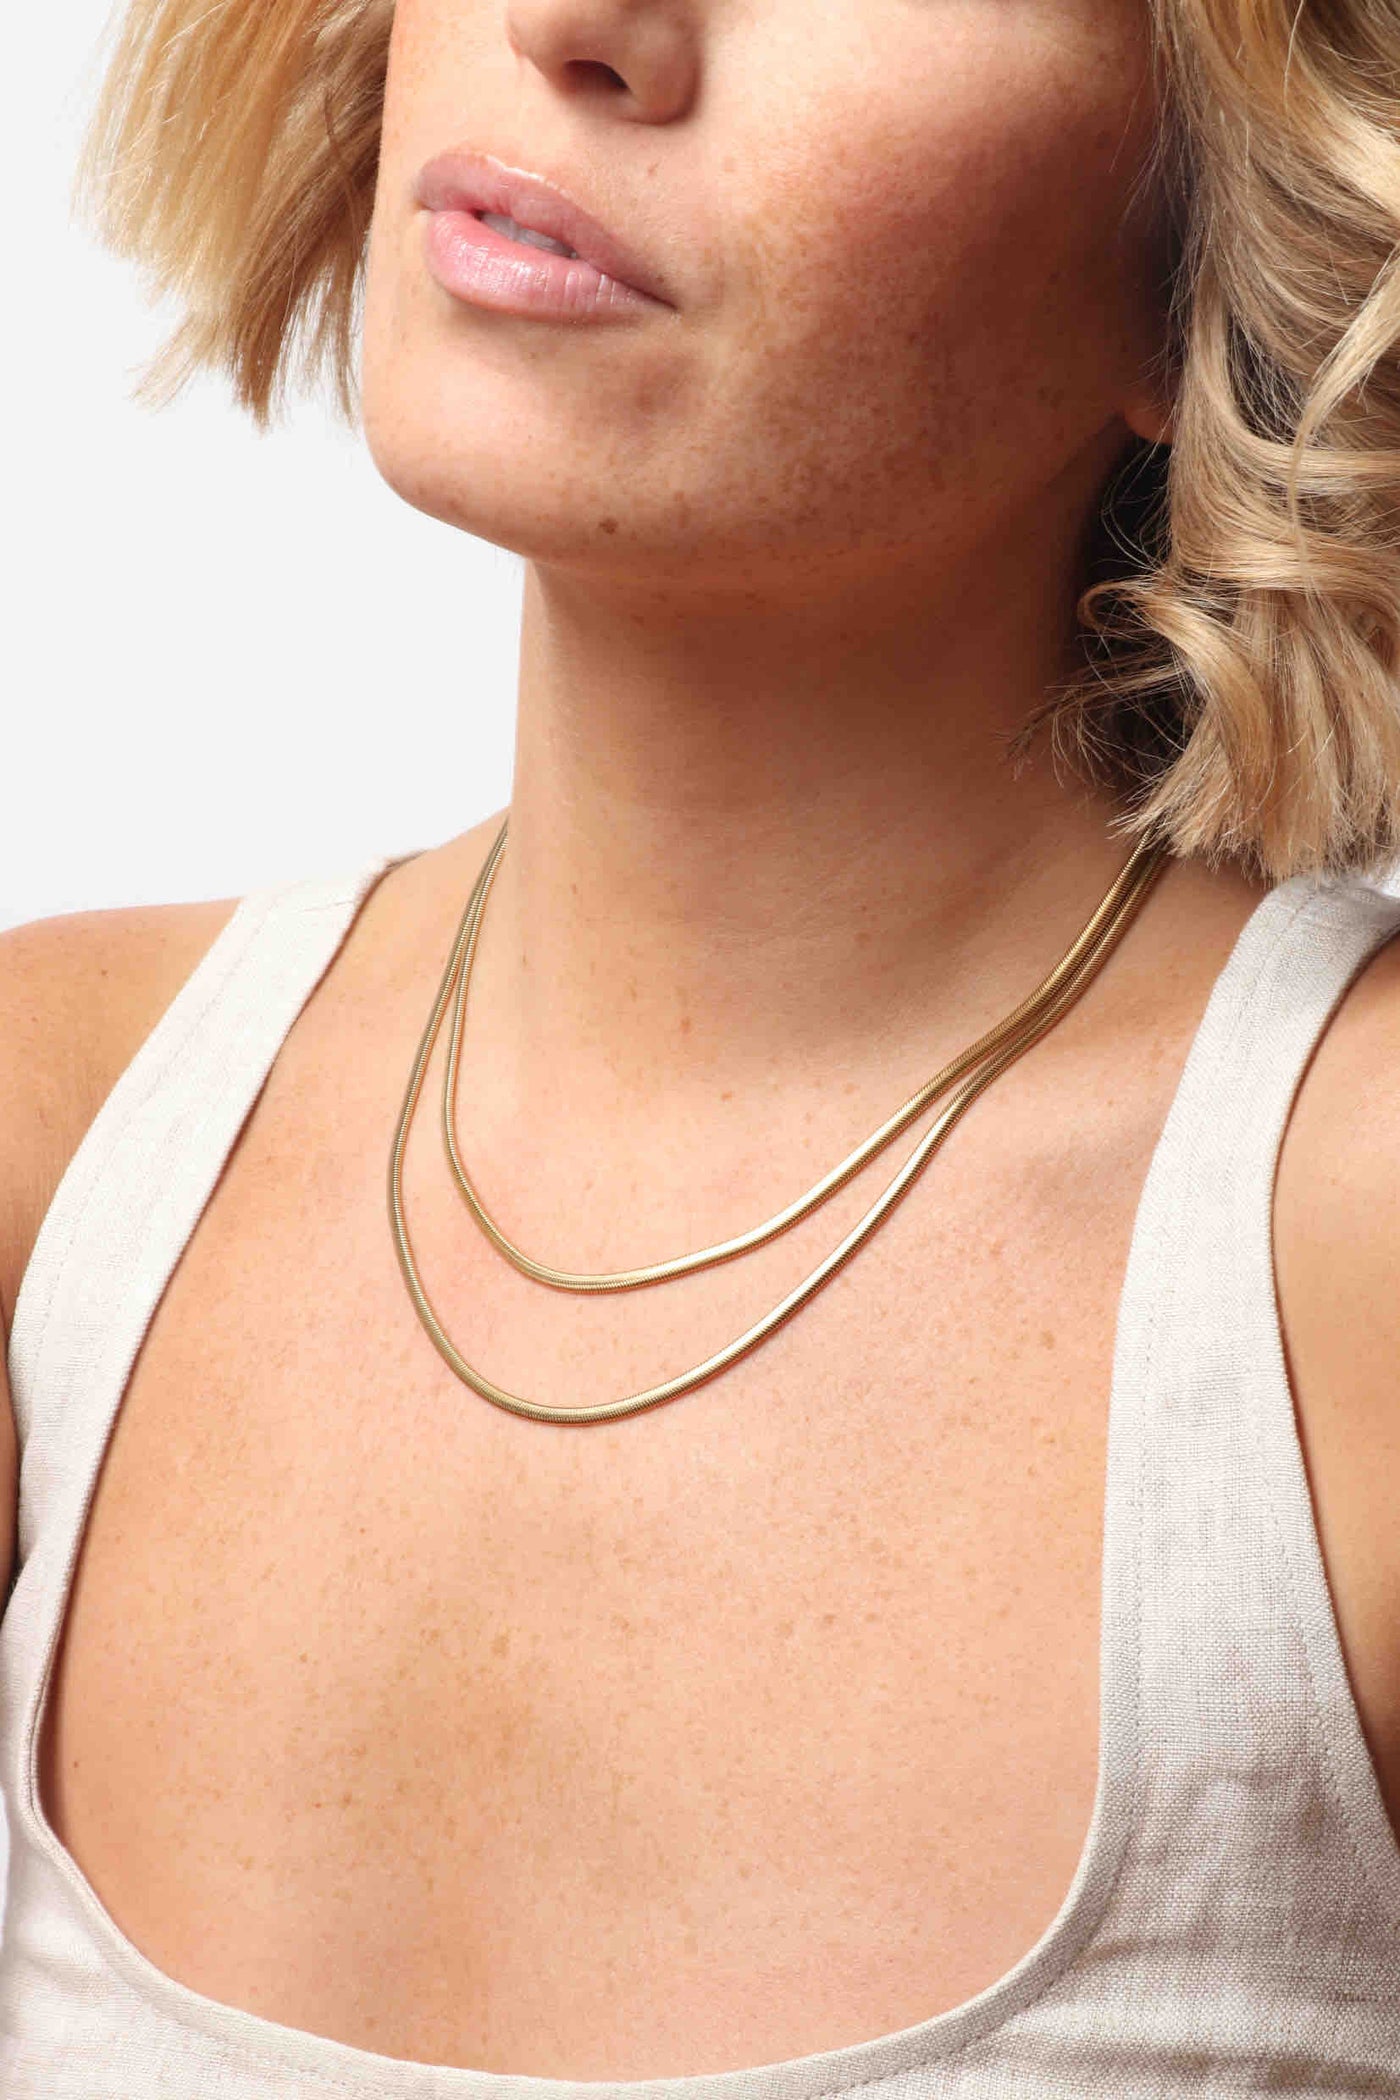 Marrin Costello wearing Marrin Costello Jewelry Ramsey Layers snake herringbone chain layered together 2 in 1 necklace with lobster clasp closure and extender. Waterproof, sustainable, hypoallergenic. 14k gold plated stainless steel.